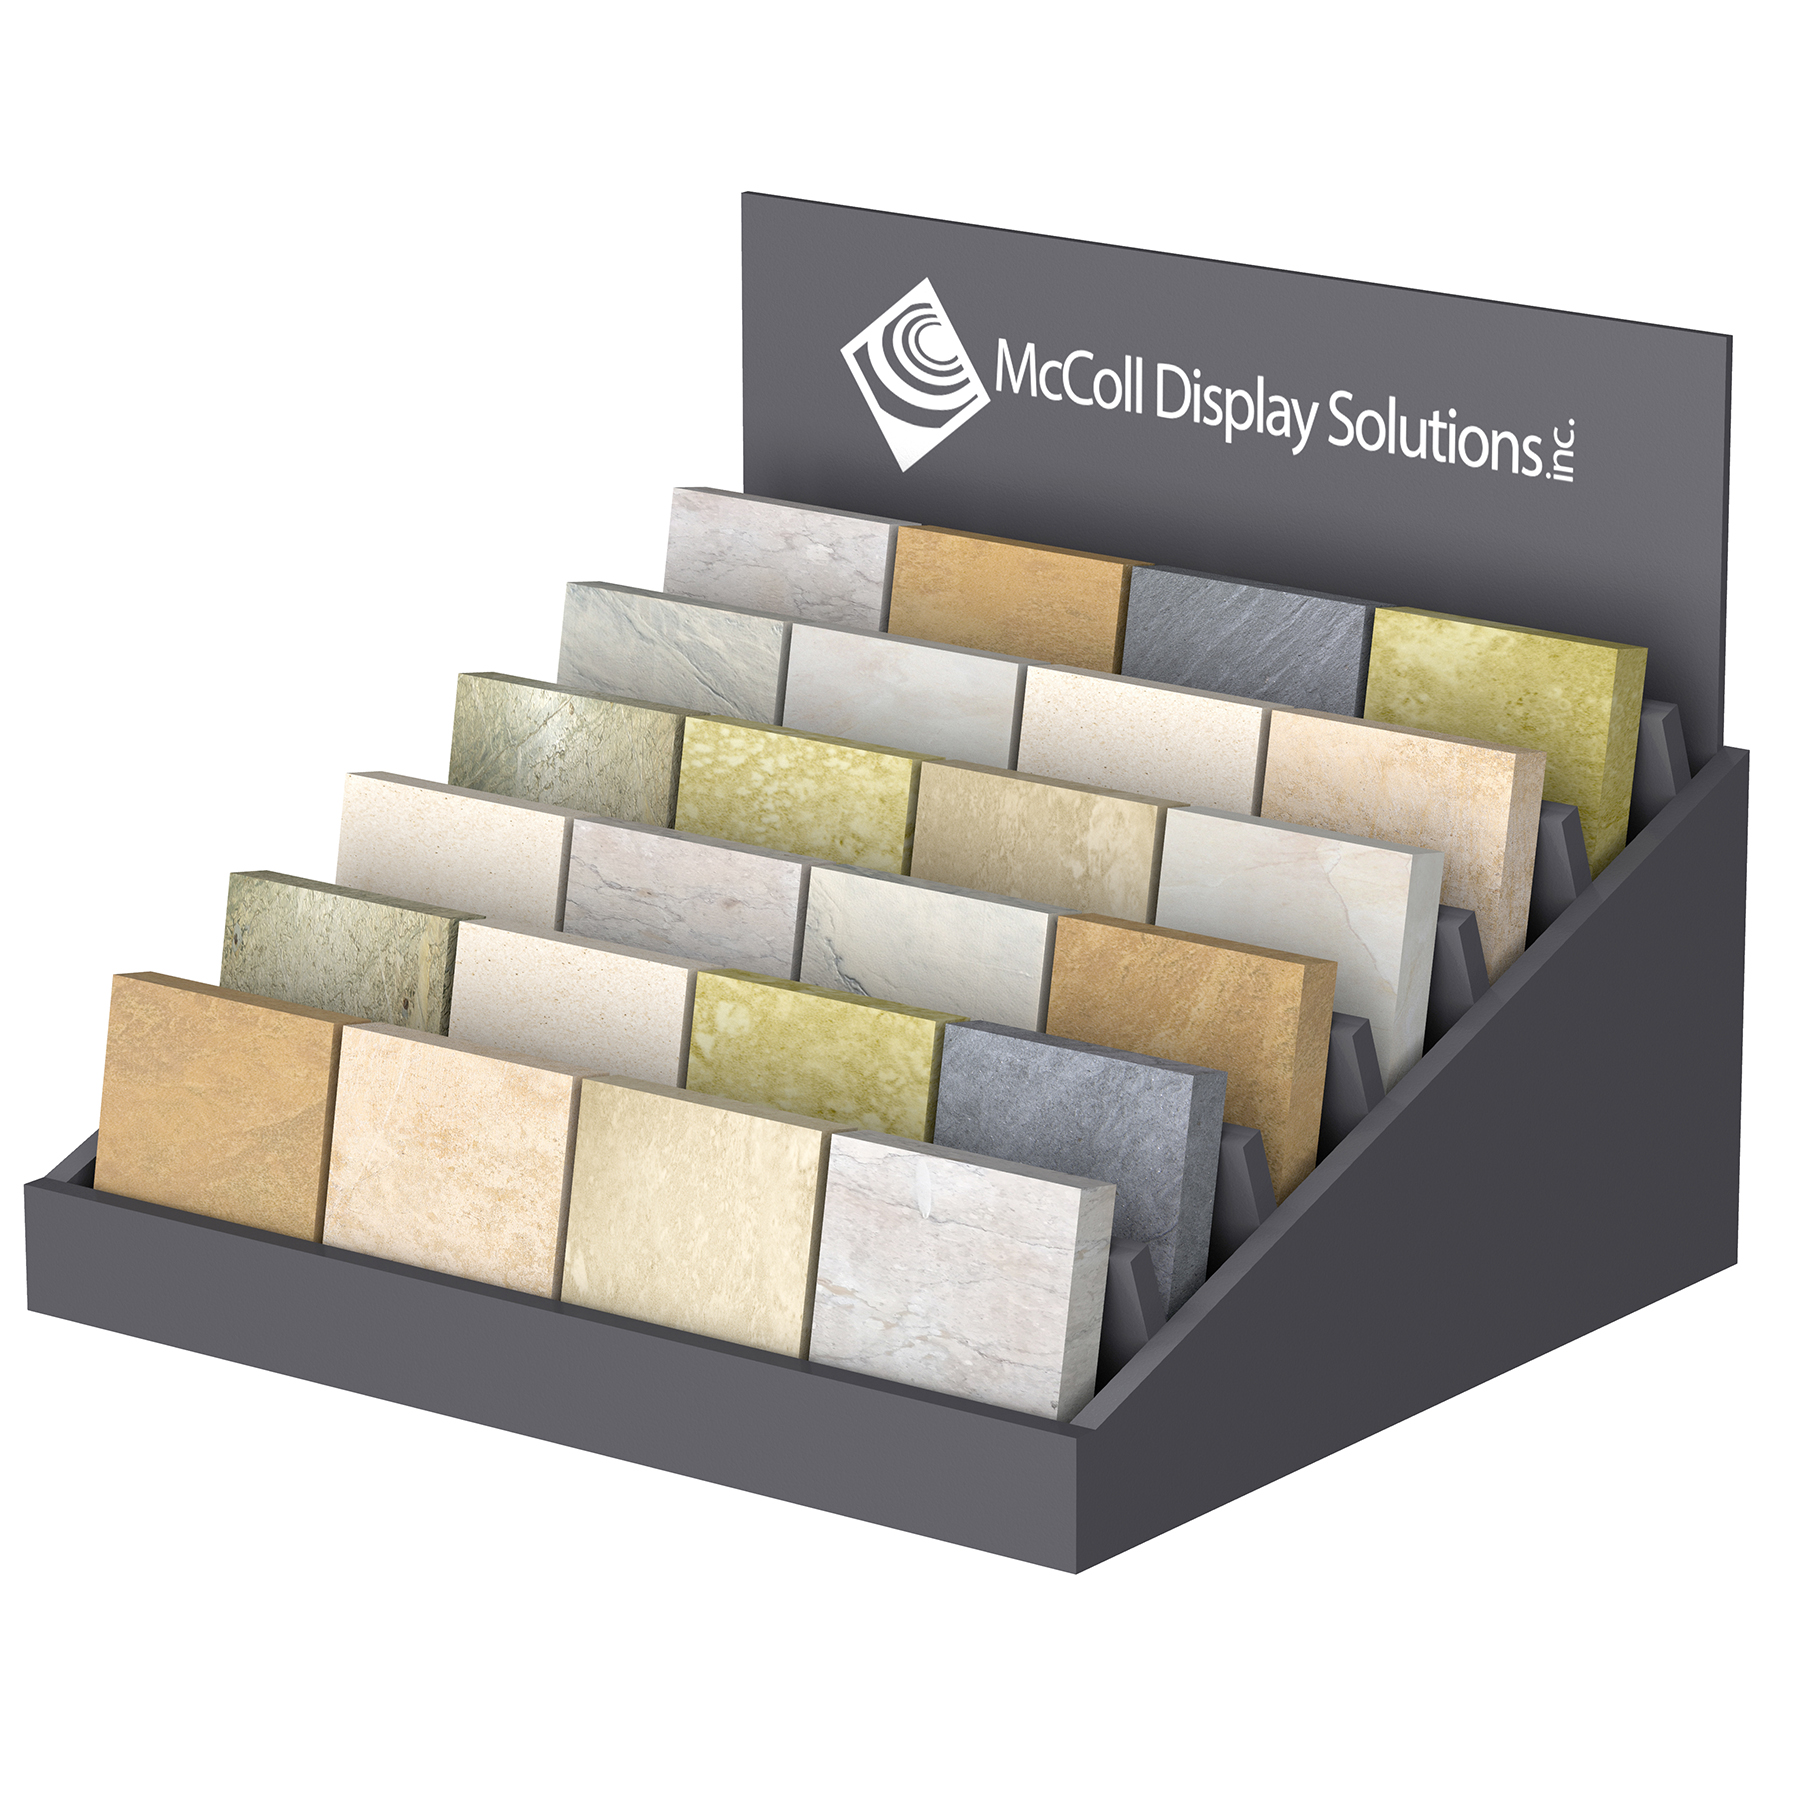 CD69 Countertop Tray Angled Customizable Samples Tile Stone Marble Composite Synthetic Showroom Displays McColl Display